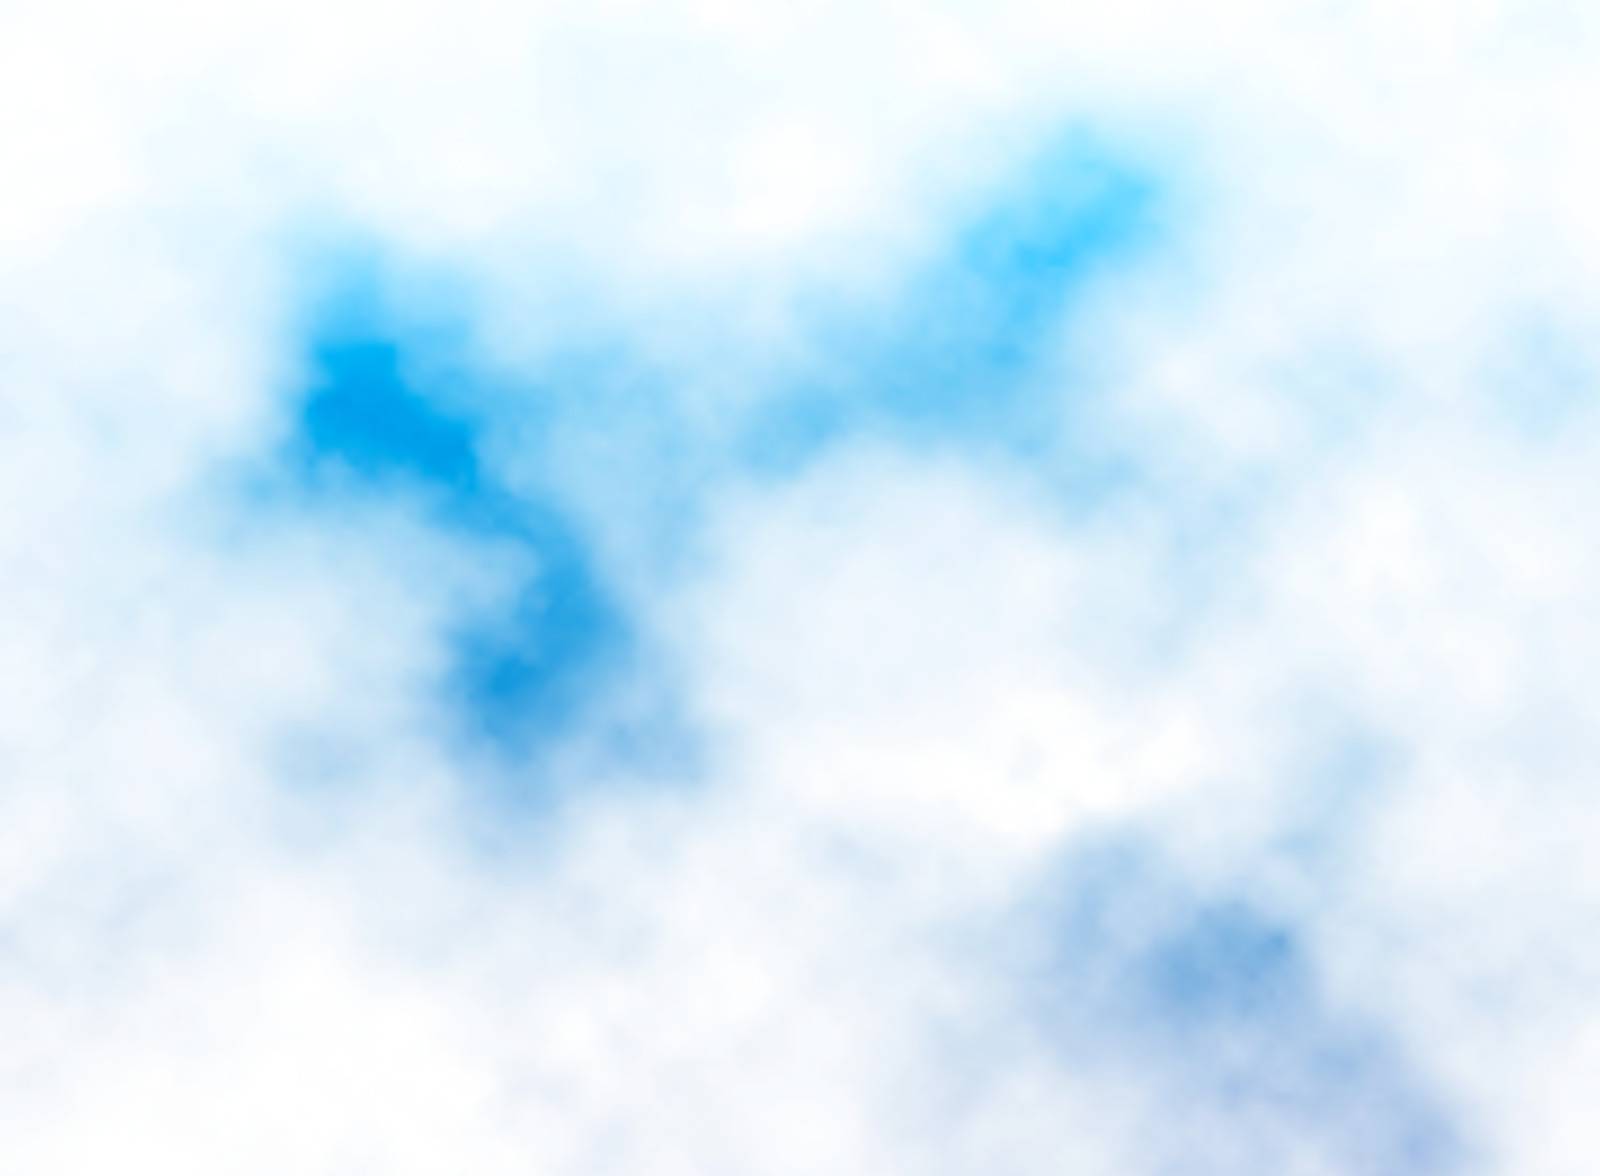 Editable vector illustration of fluffy white clouds in a blue sky made with a gradient mesh